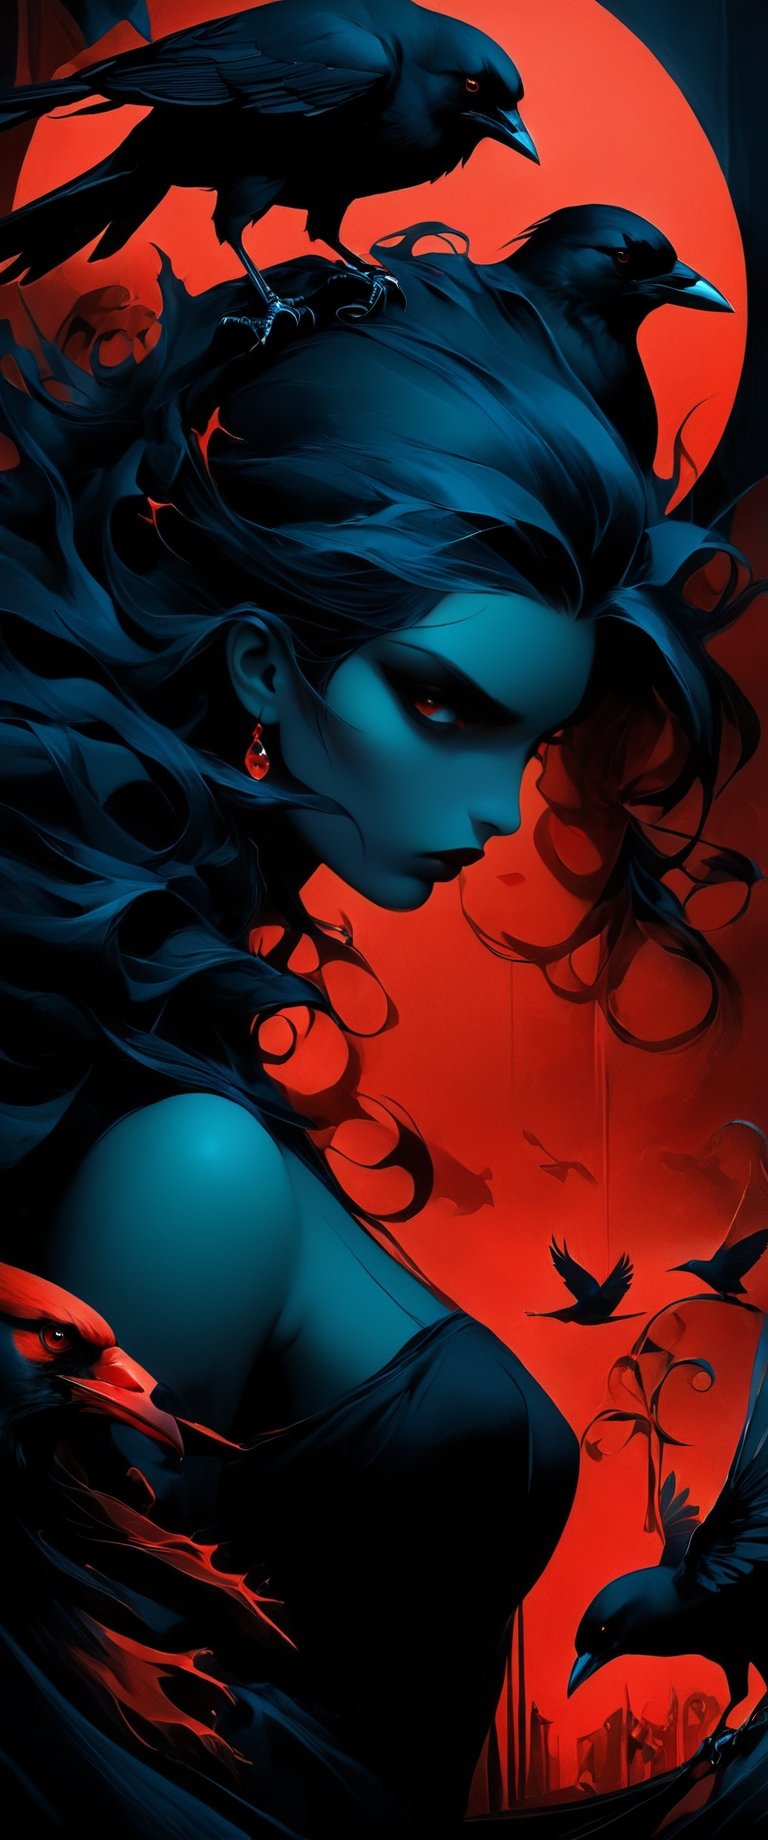 a woman standing in front of a full moon, digital art, Artstation, gothic art, crows as a symbol of death, artgerm and james jean, metal album cover art, 2d art cover, avatar image, joshua middleton comic art, light red and deep blue mood, beautiful depiction,anx13ty_style,twisted_thoughts,ct-niji2,renny the insta girl